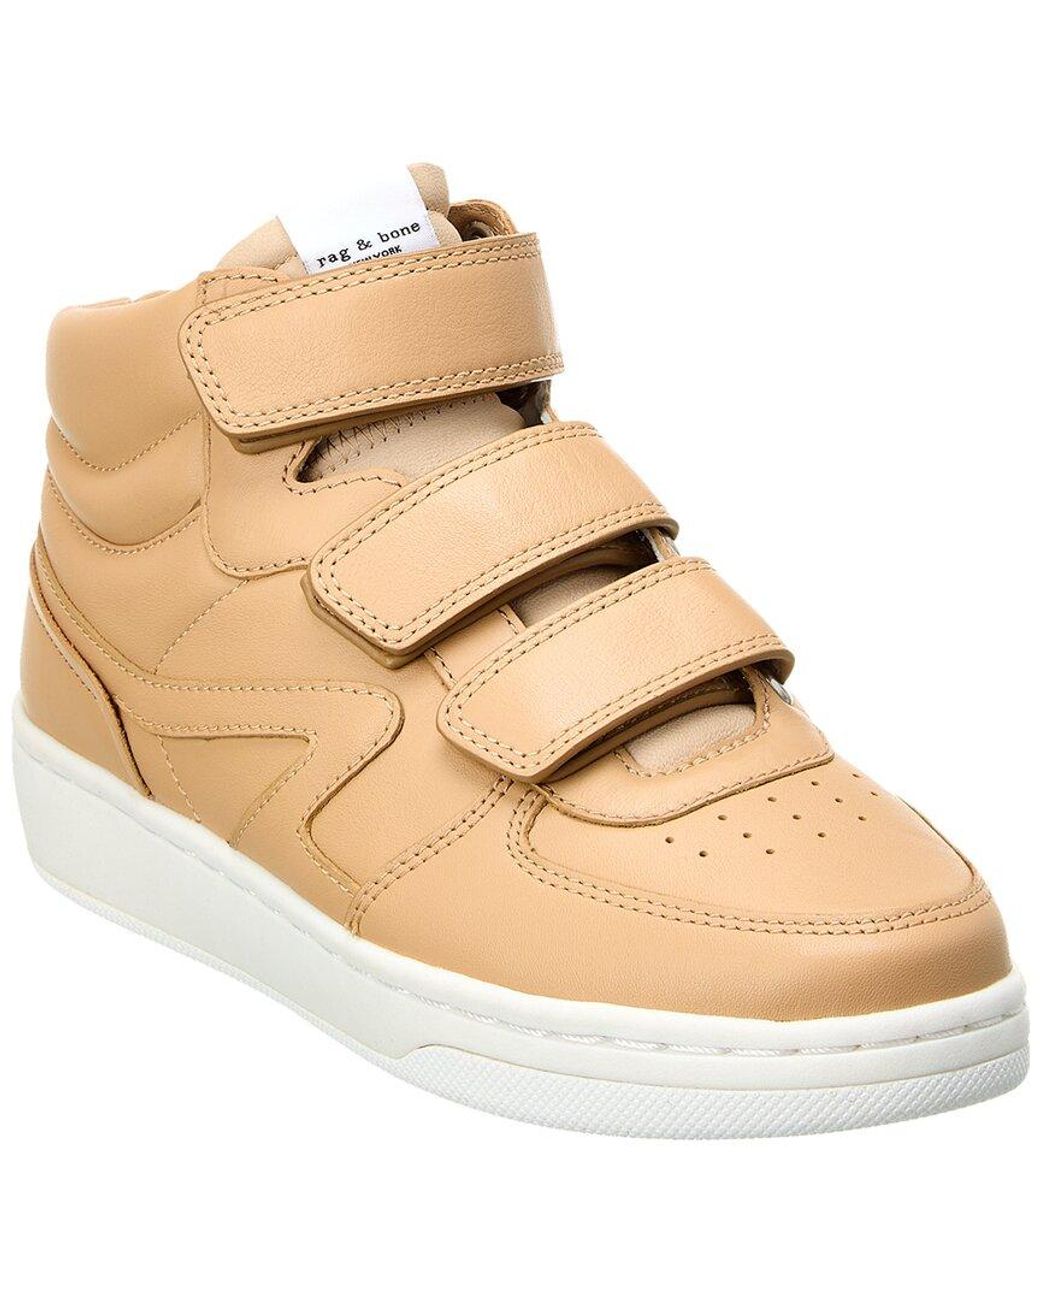 Rag & Bone Retro Court Mid Strap Leather Sneaker in Natural | Lyst